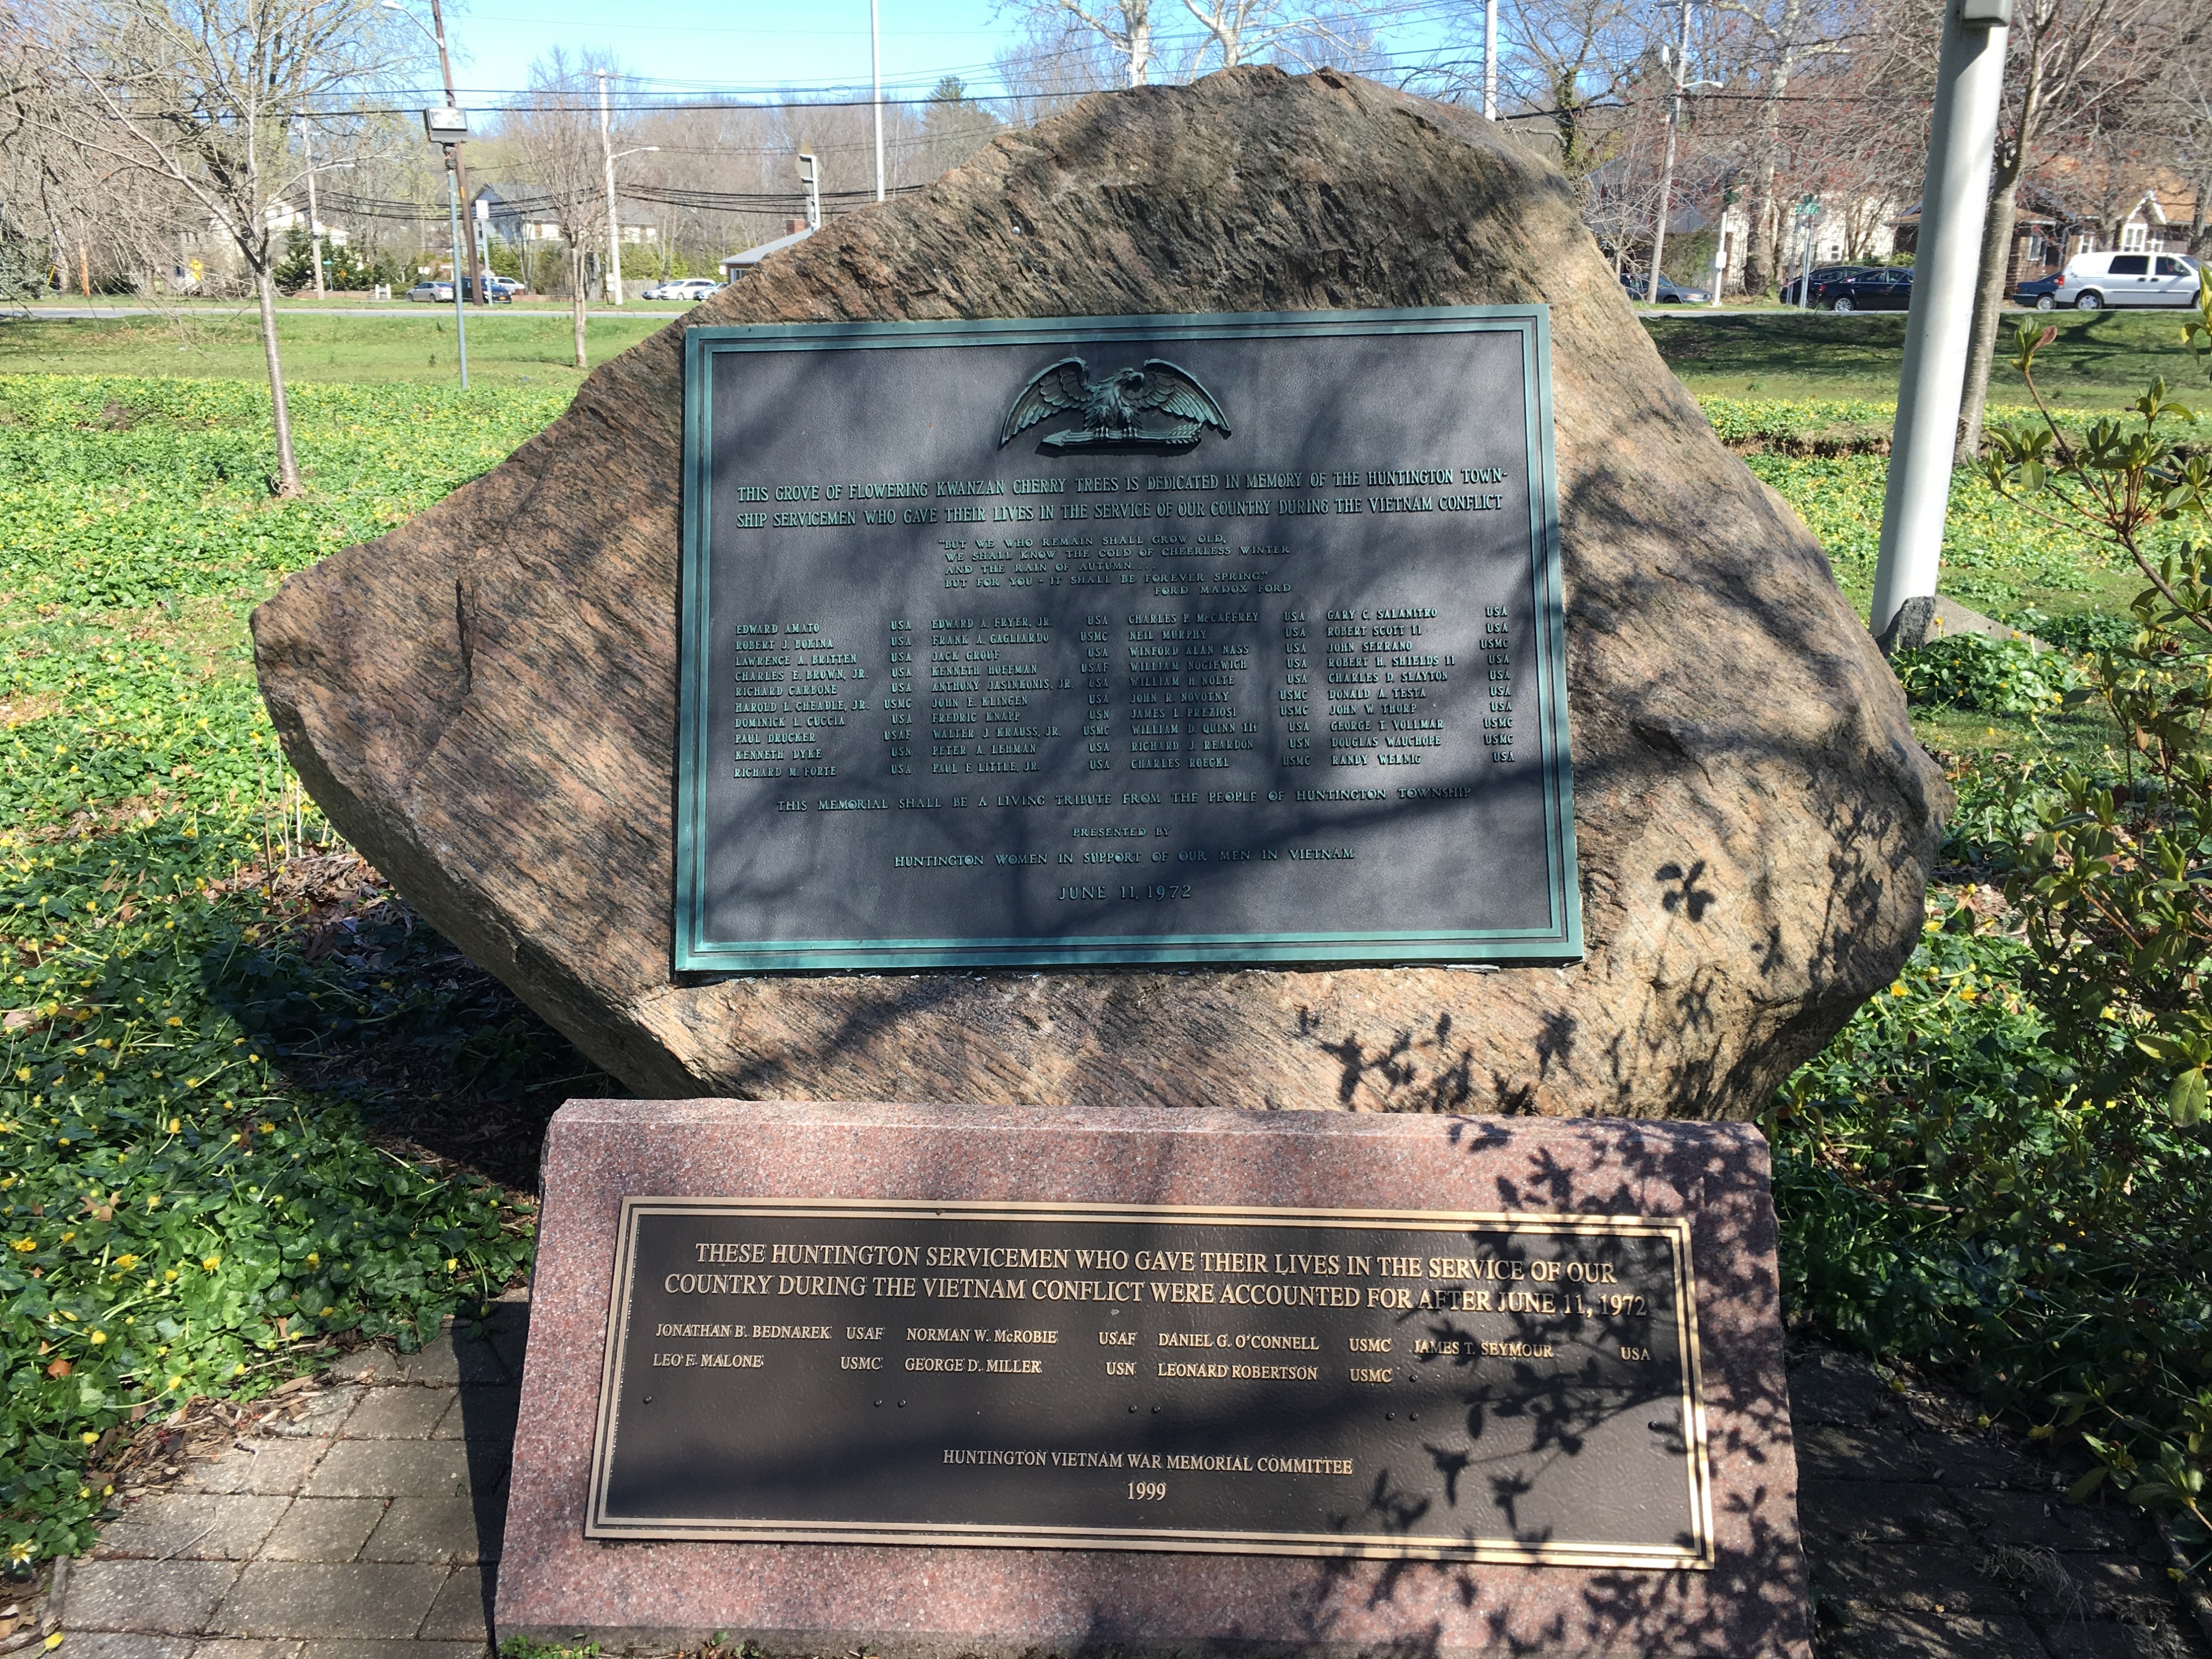 Similarly, this boulder in the Village Green recognizes the ultimate sacrifice made by 48 men during the Vietnam War. These men are also remembered with a living memorial of Kwanzan cherry trees.